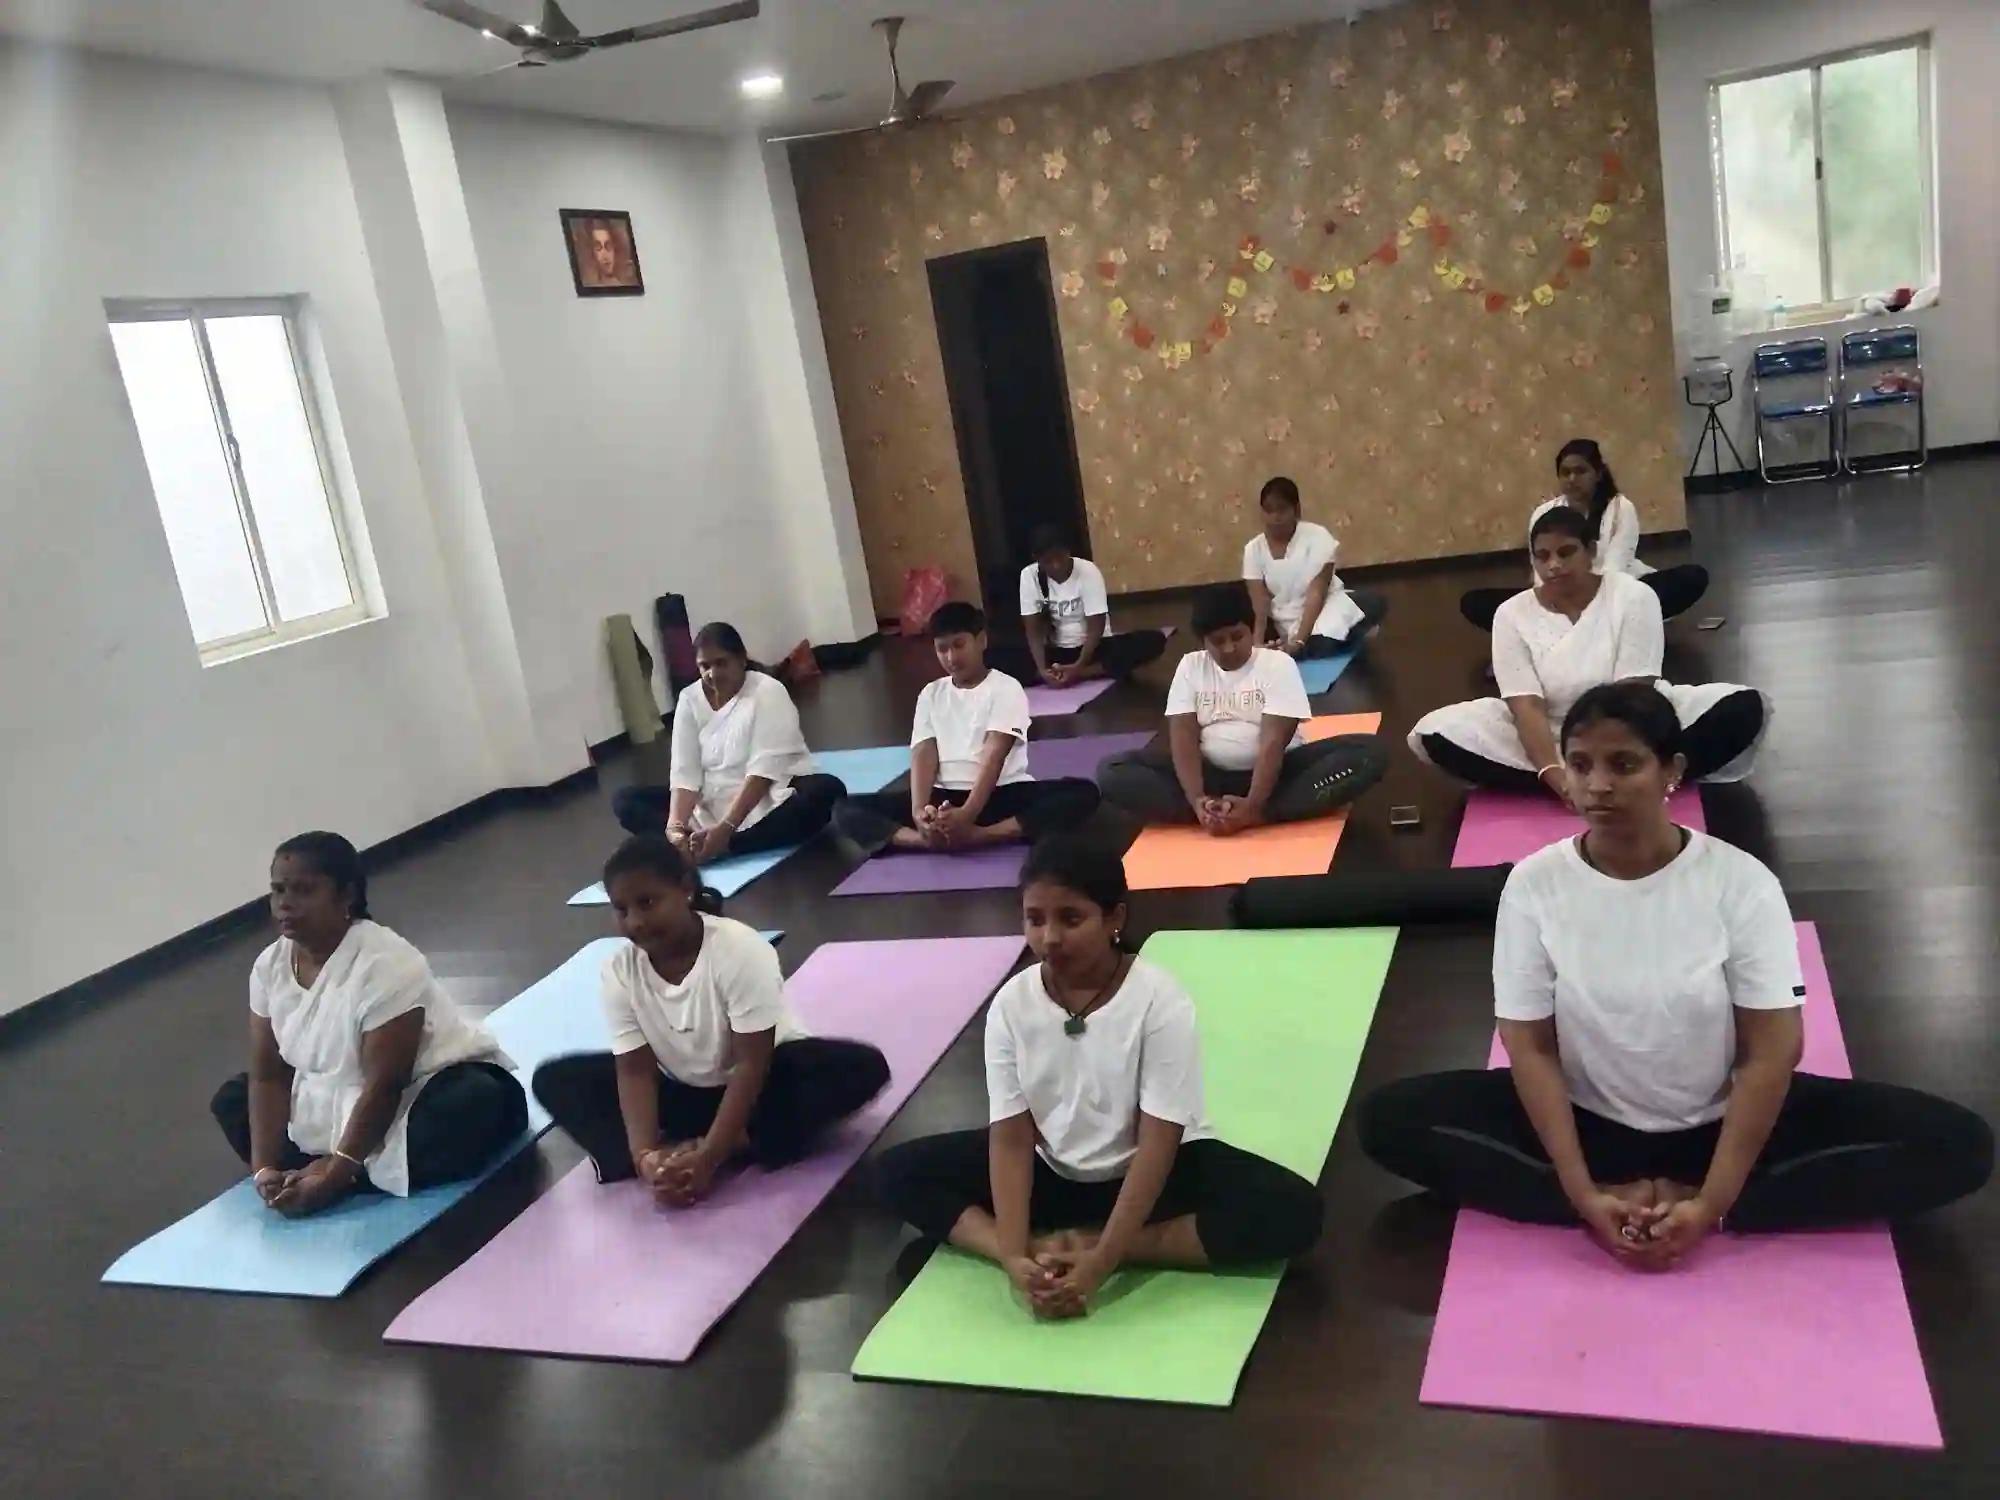 yoga classes in chennai - How much does a yoga class cost in Chennai